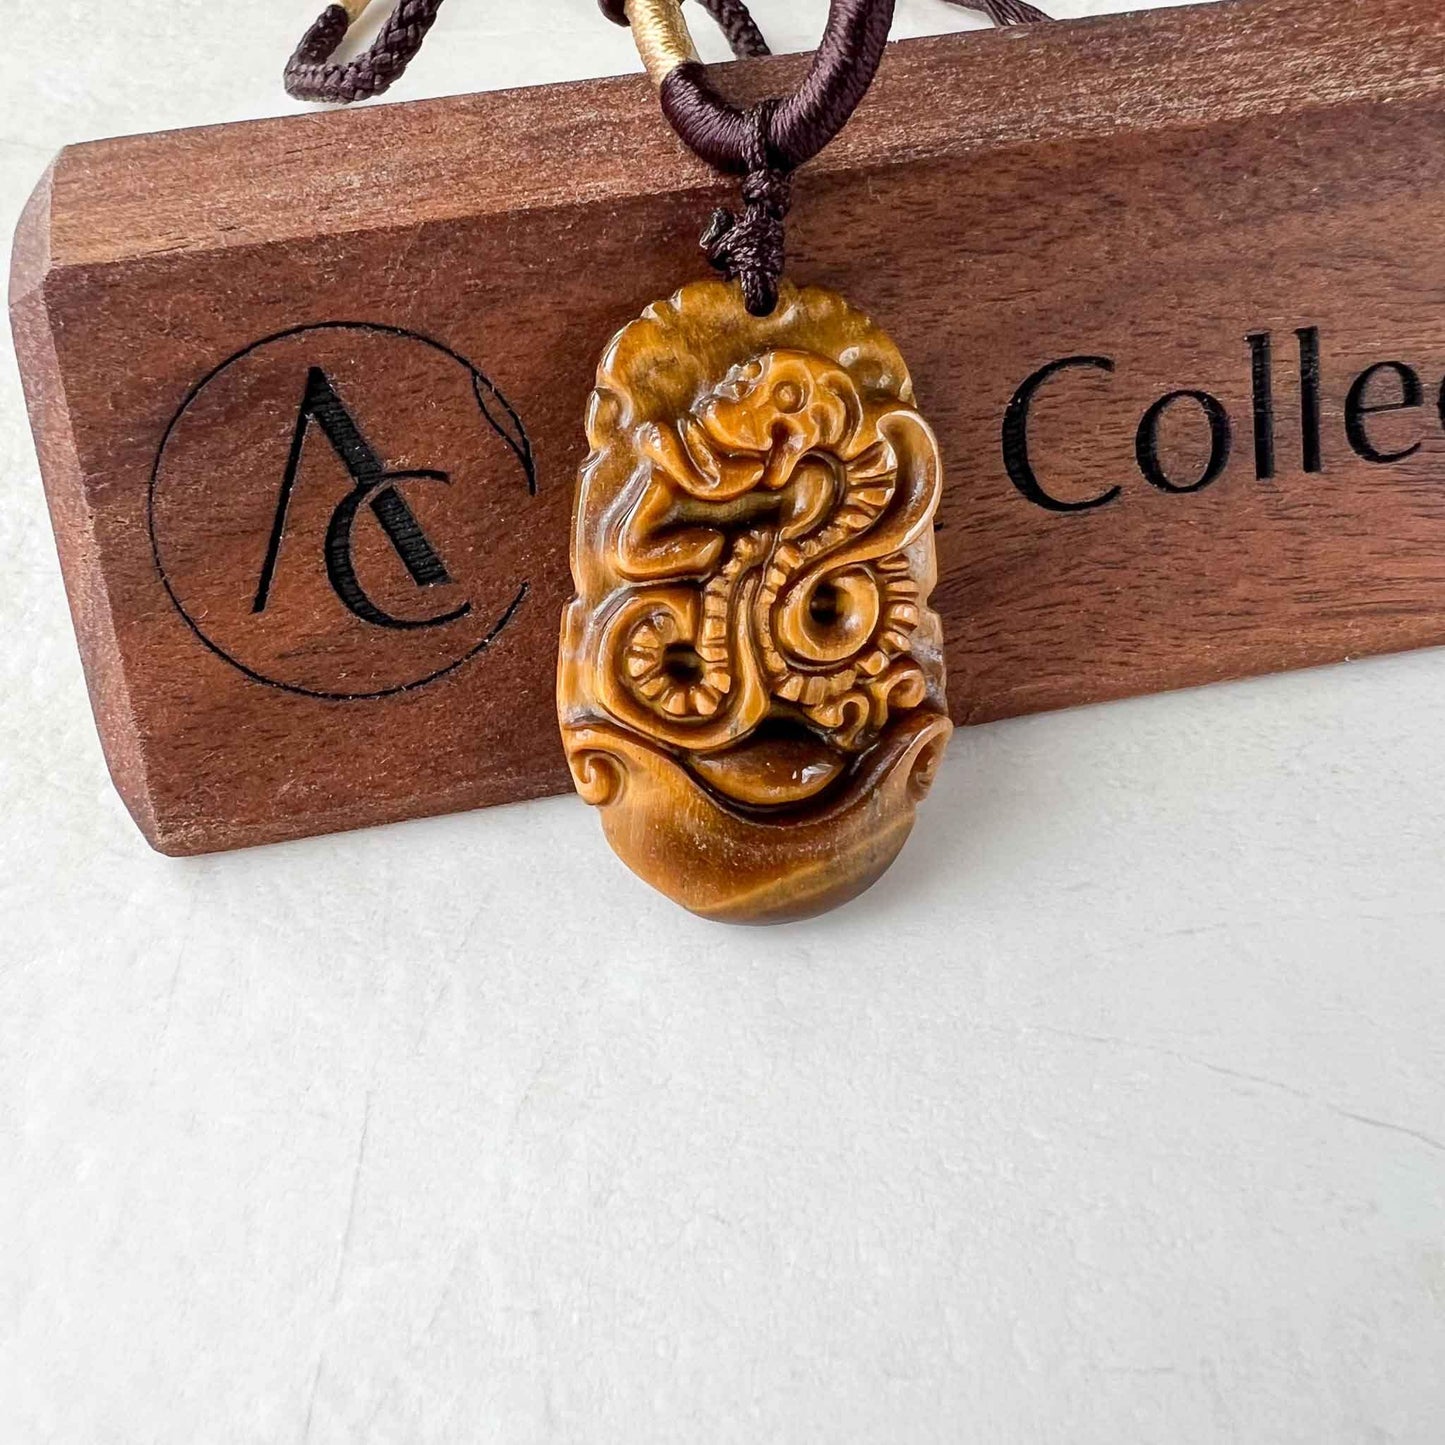 Tiger Eye Snake Chinese Zodiac Carved Pendant Necklace, YW-0110-1685931429